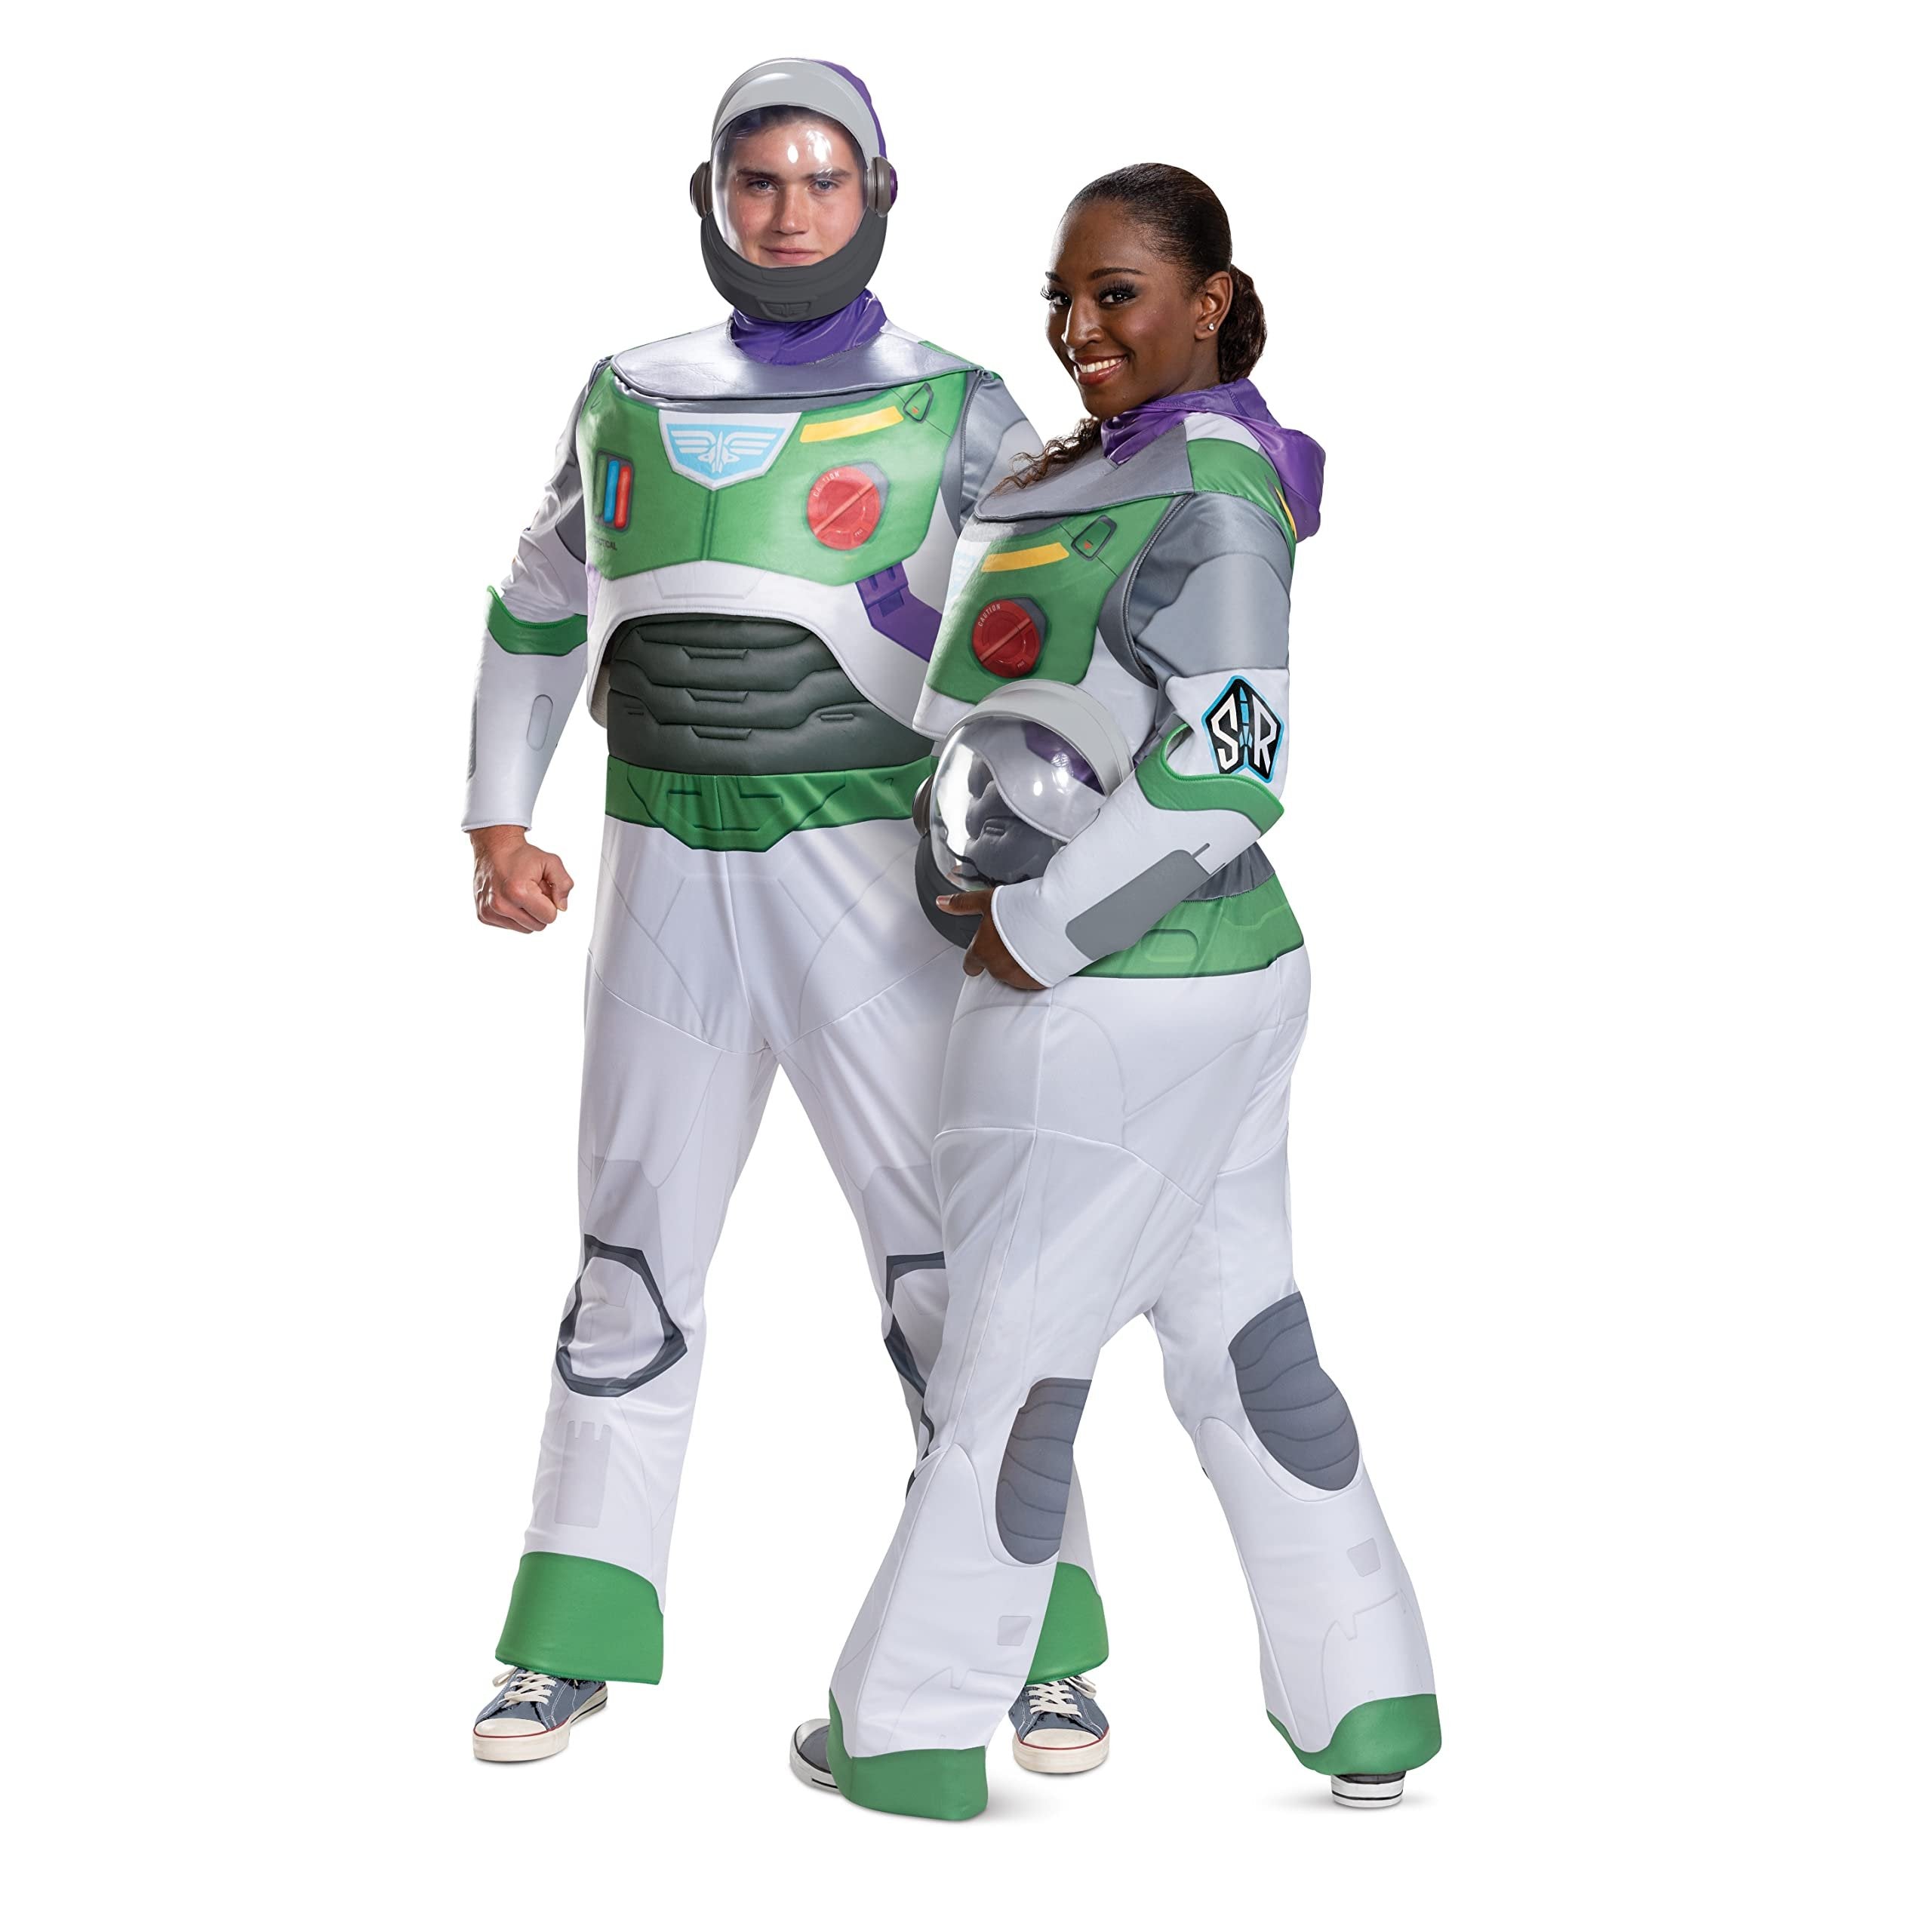 Disguise Buzz Lightyear Costume Adult Size Large 42-46, Official Disney Outfit As Shown